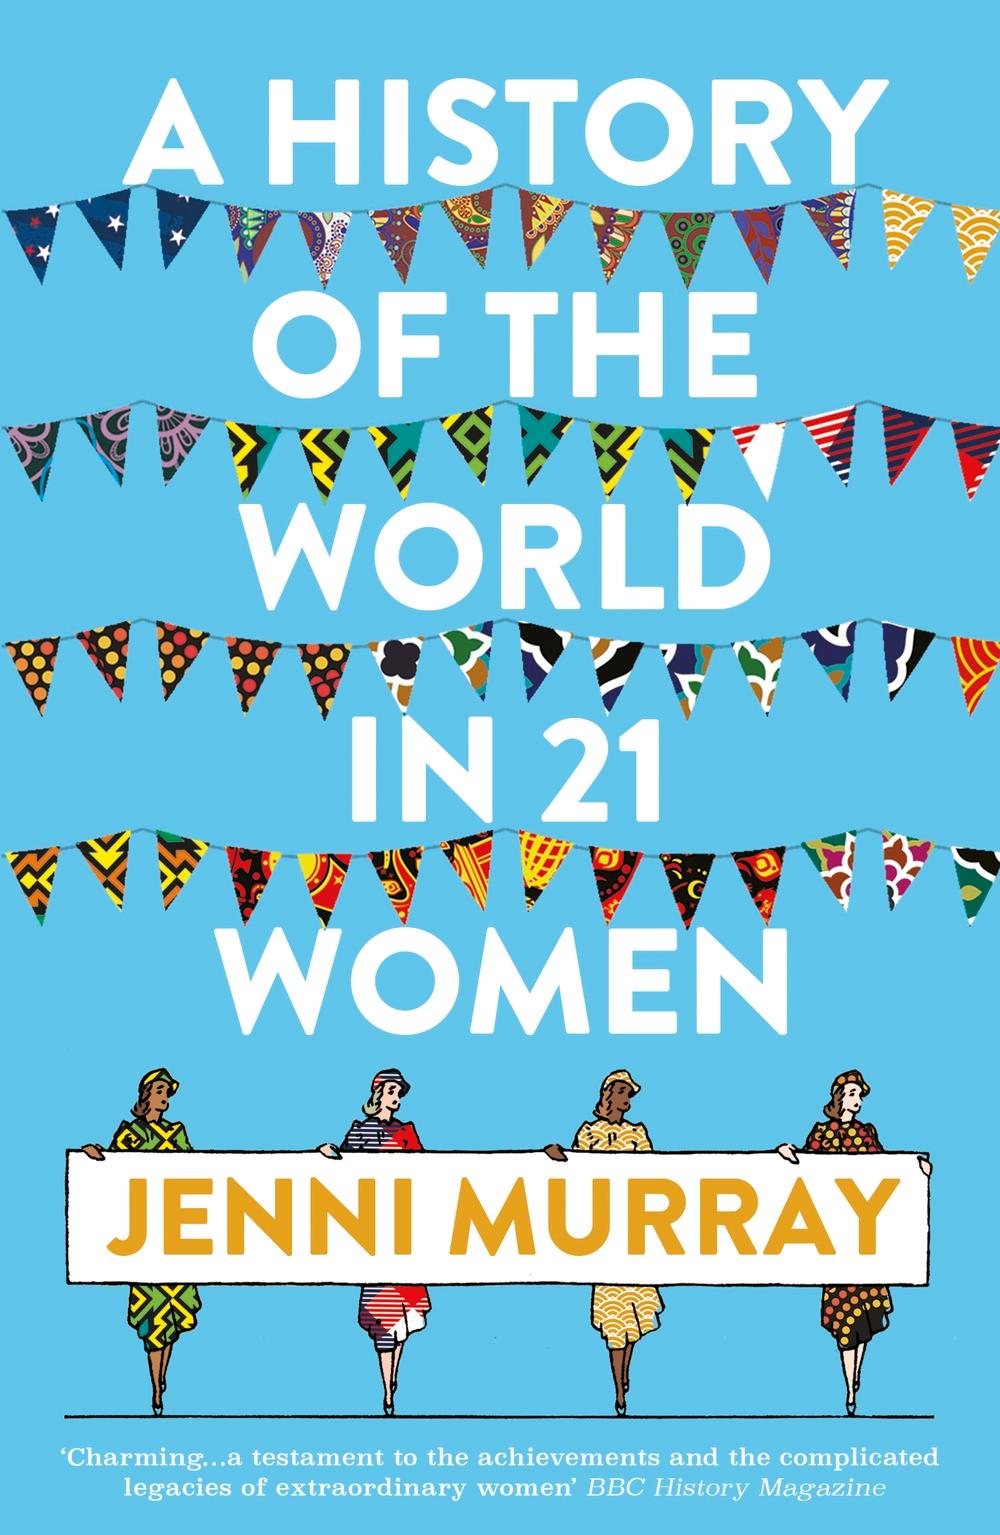 History of the World in 21 Women: A Personal Selection